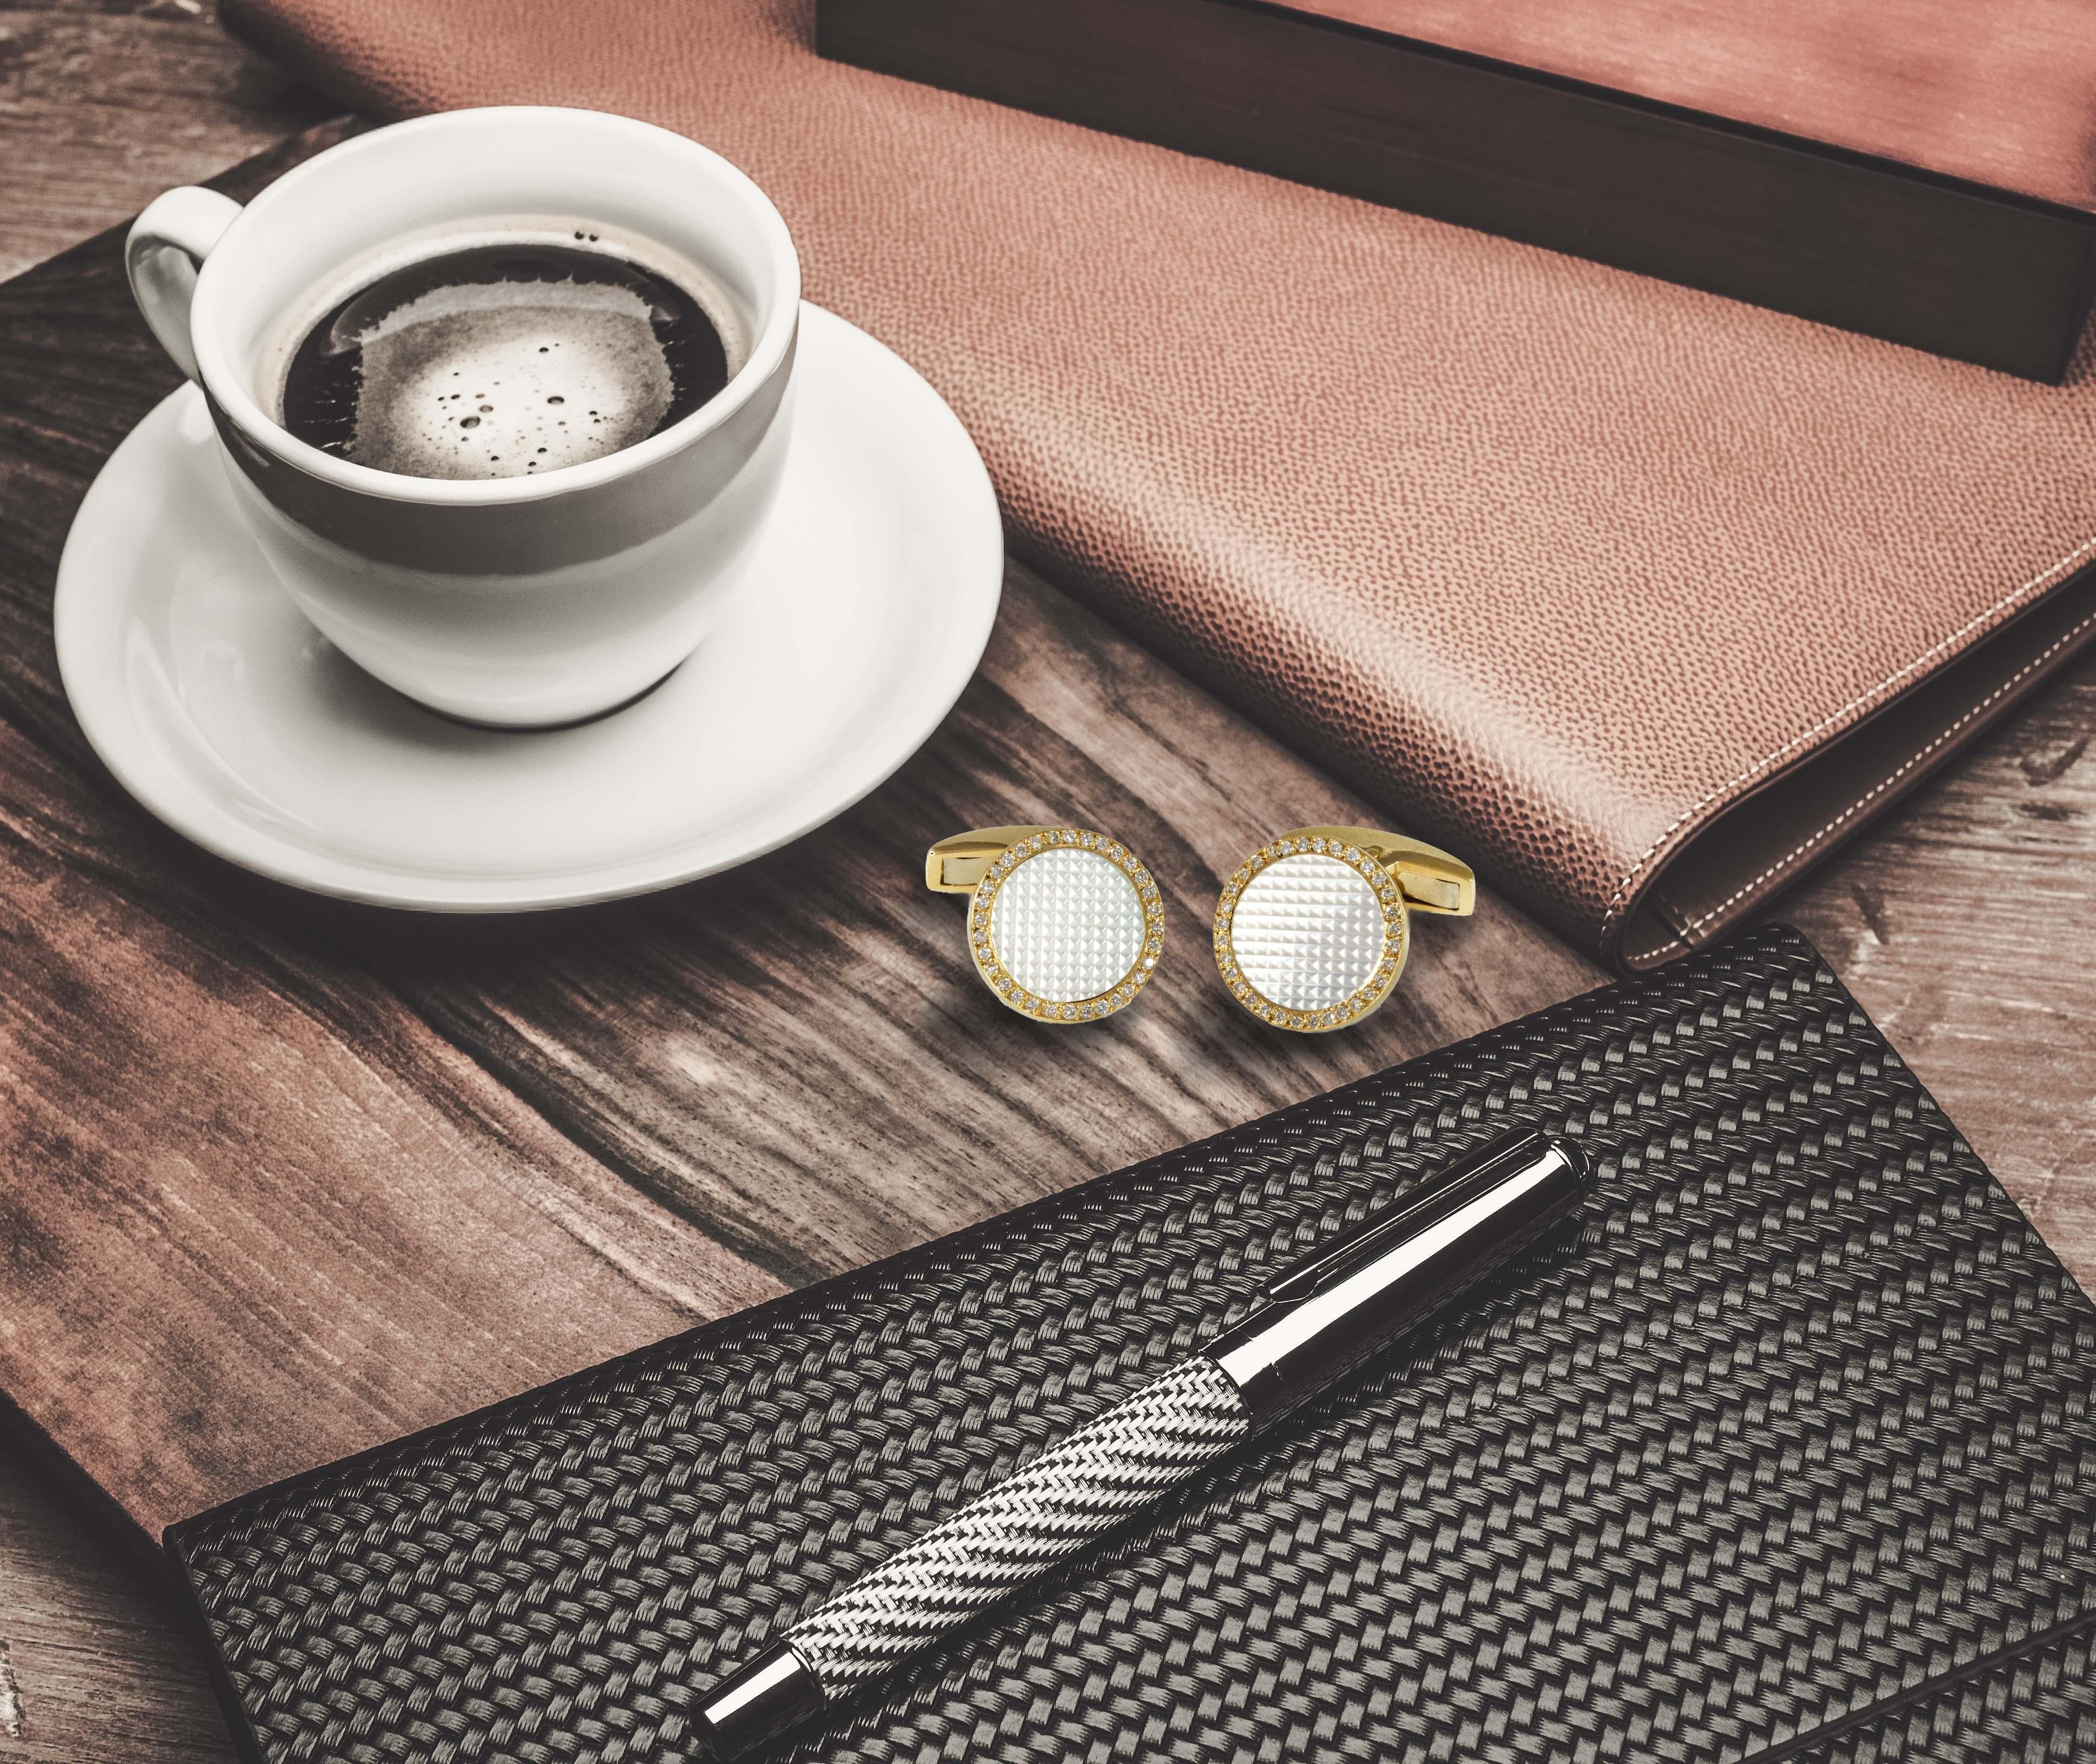 DEAKIN & FRANCIS, Piccadilly Arcade, London

The mix of luxurious yellow gold and intricate diamonds give the most stunning look - and that's exactly what you can expect with this pair of cufflinks. Made from the finest 18ct yellow gold, the round